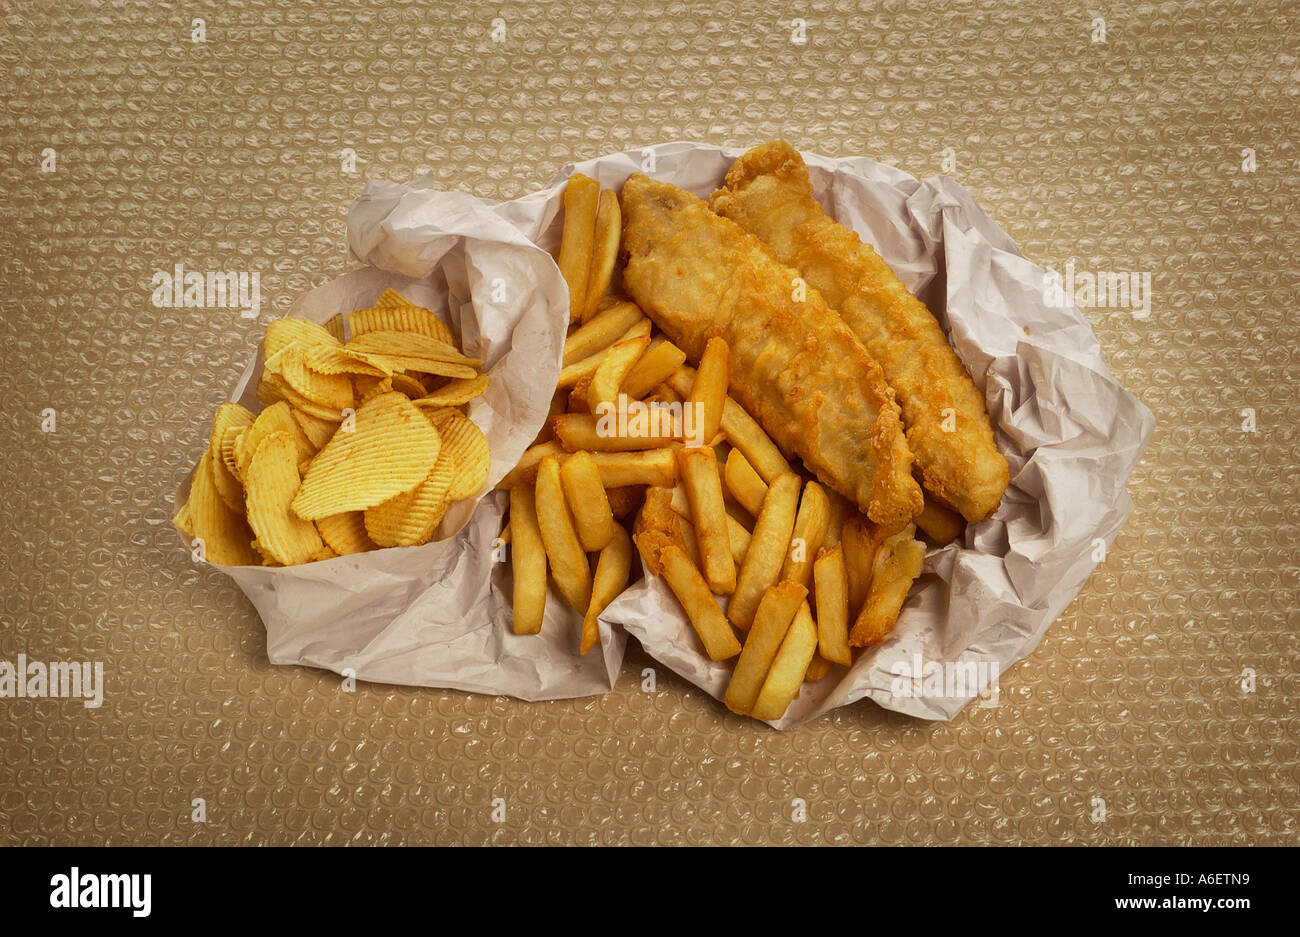 Fish chips wrapped in paper Example of high fat food to be eaten ...